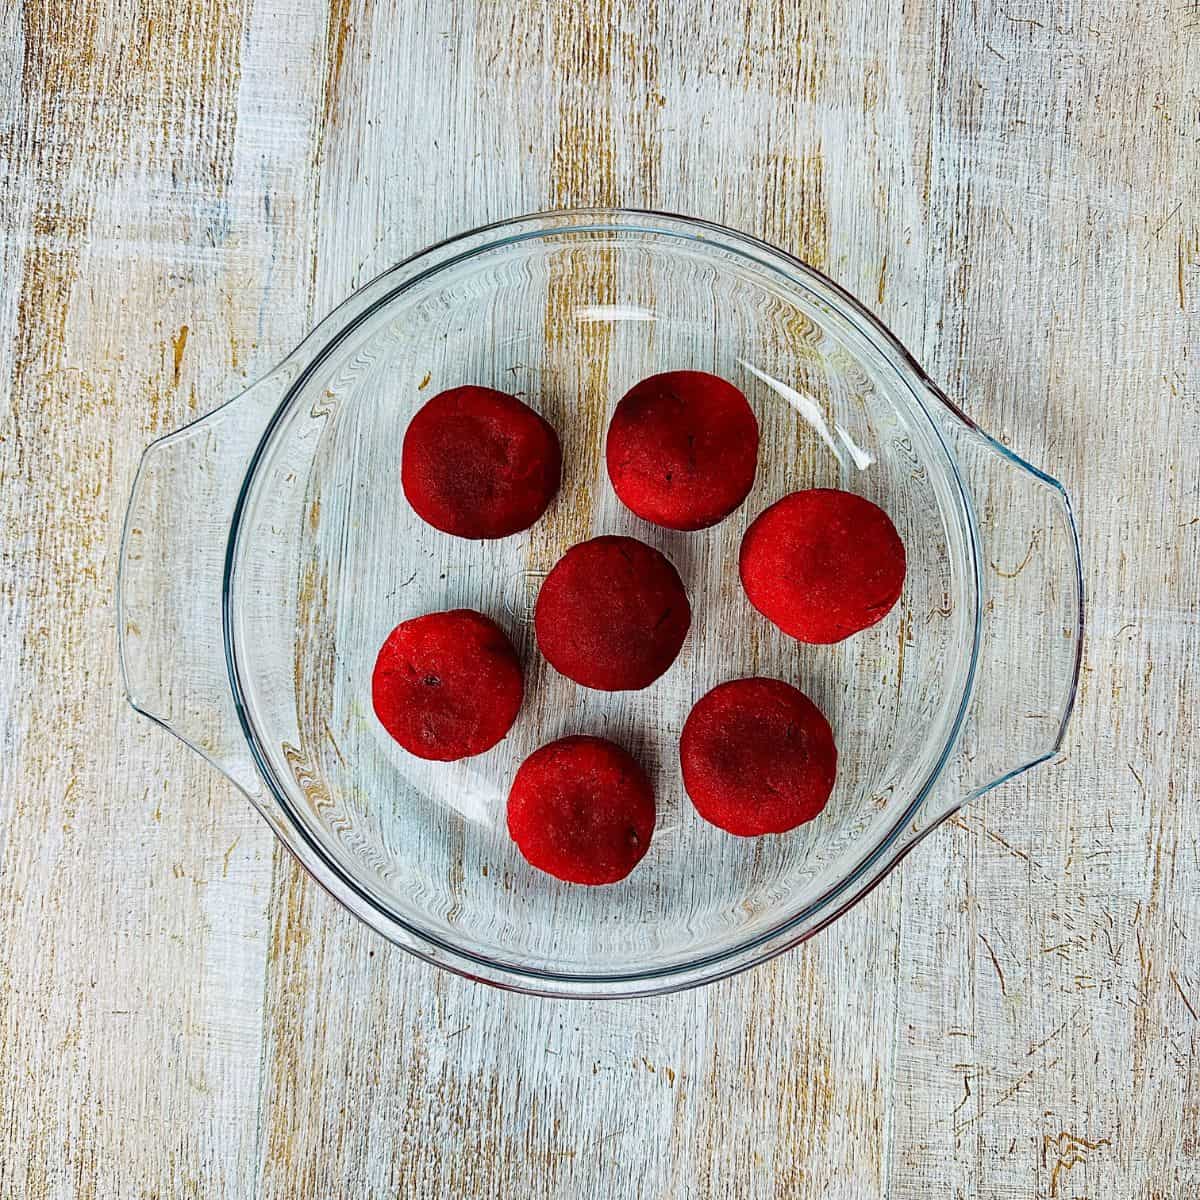 A glass bowl containing seven deep-red coloured mini beetroot burgers ready for frying.